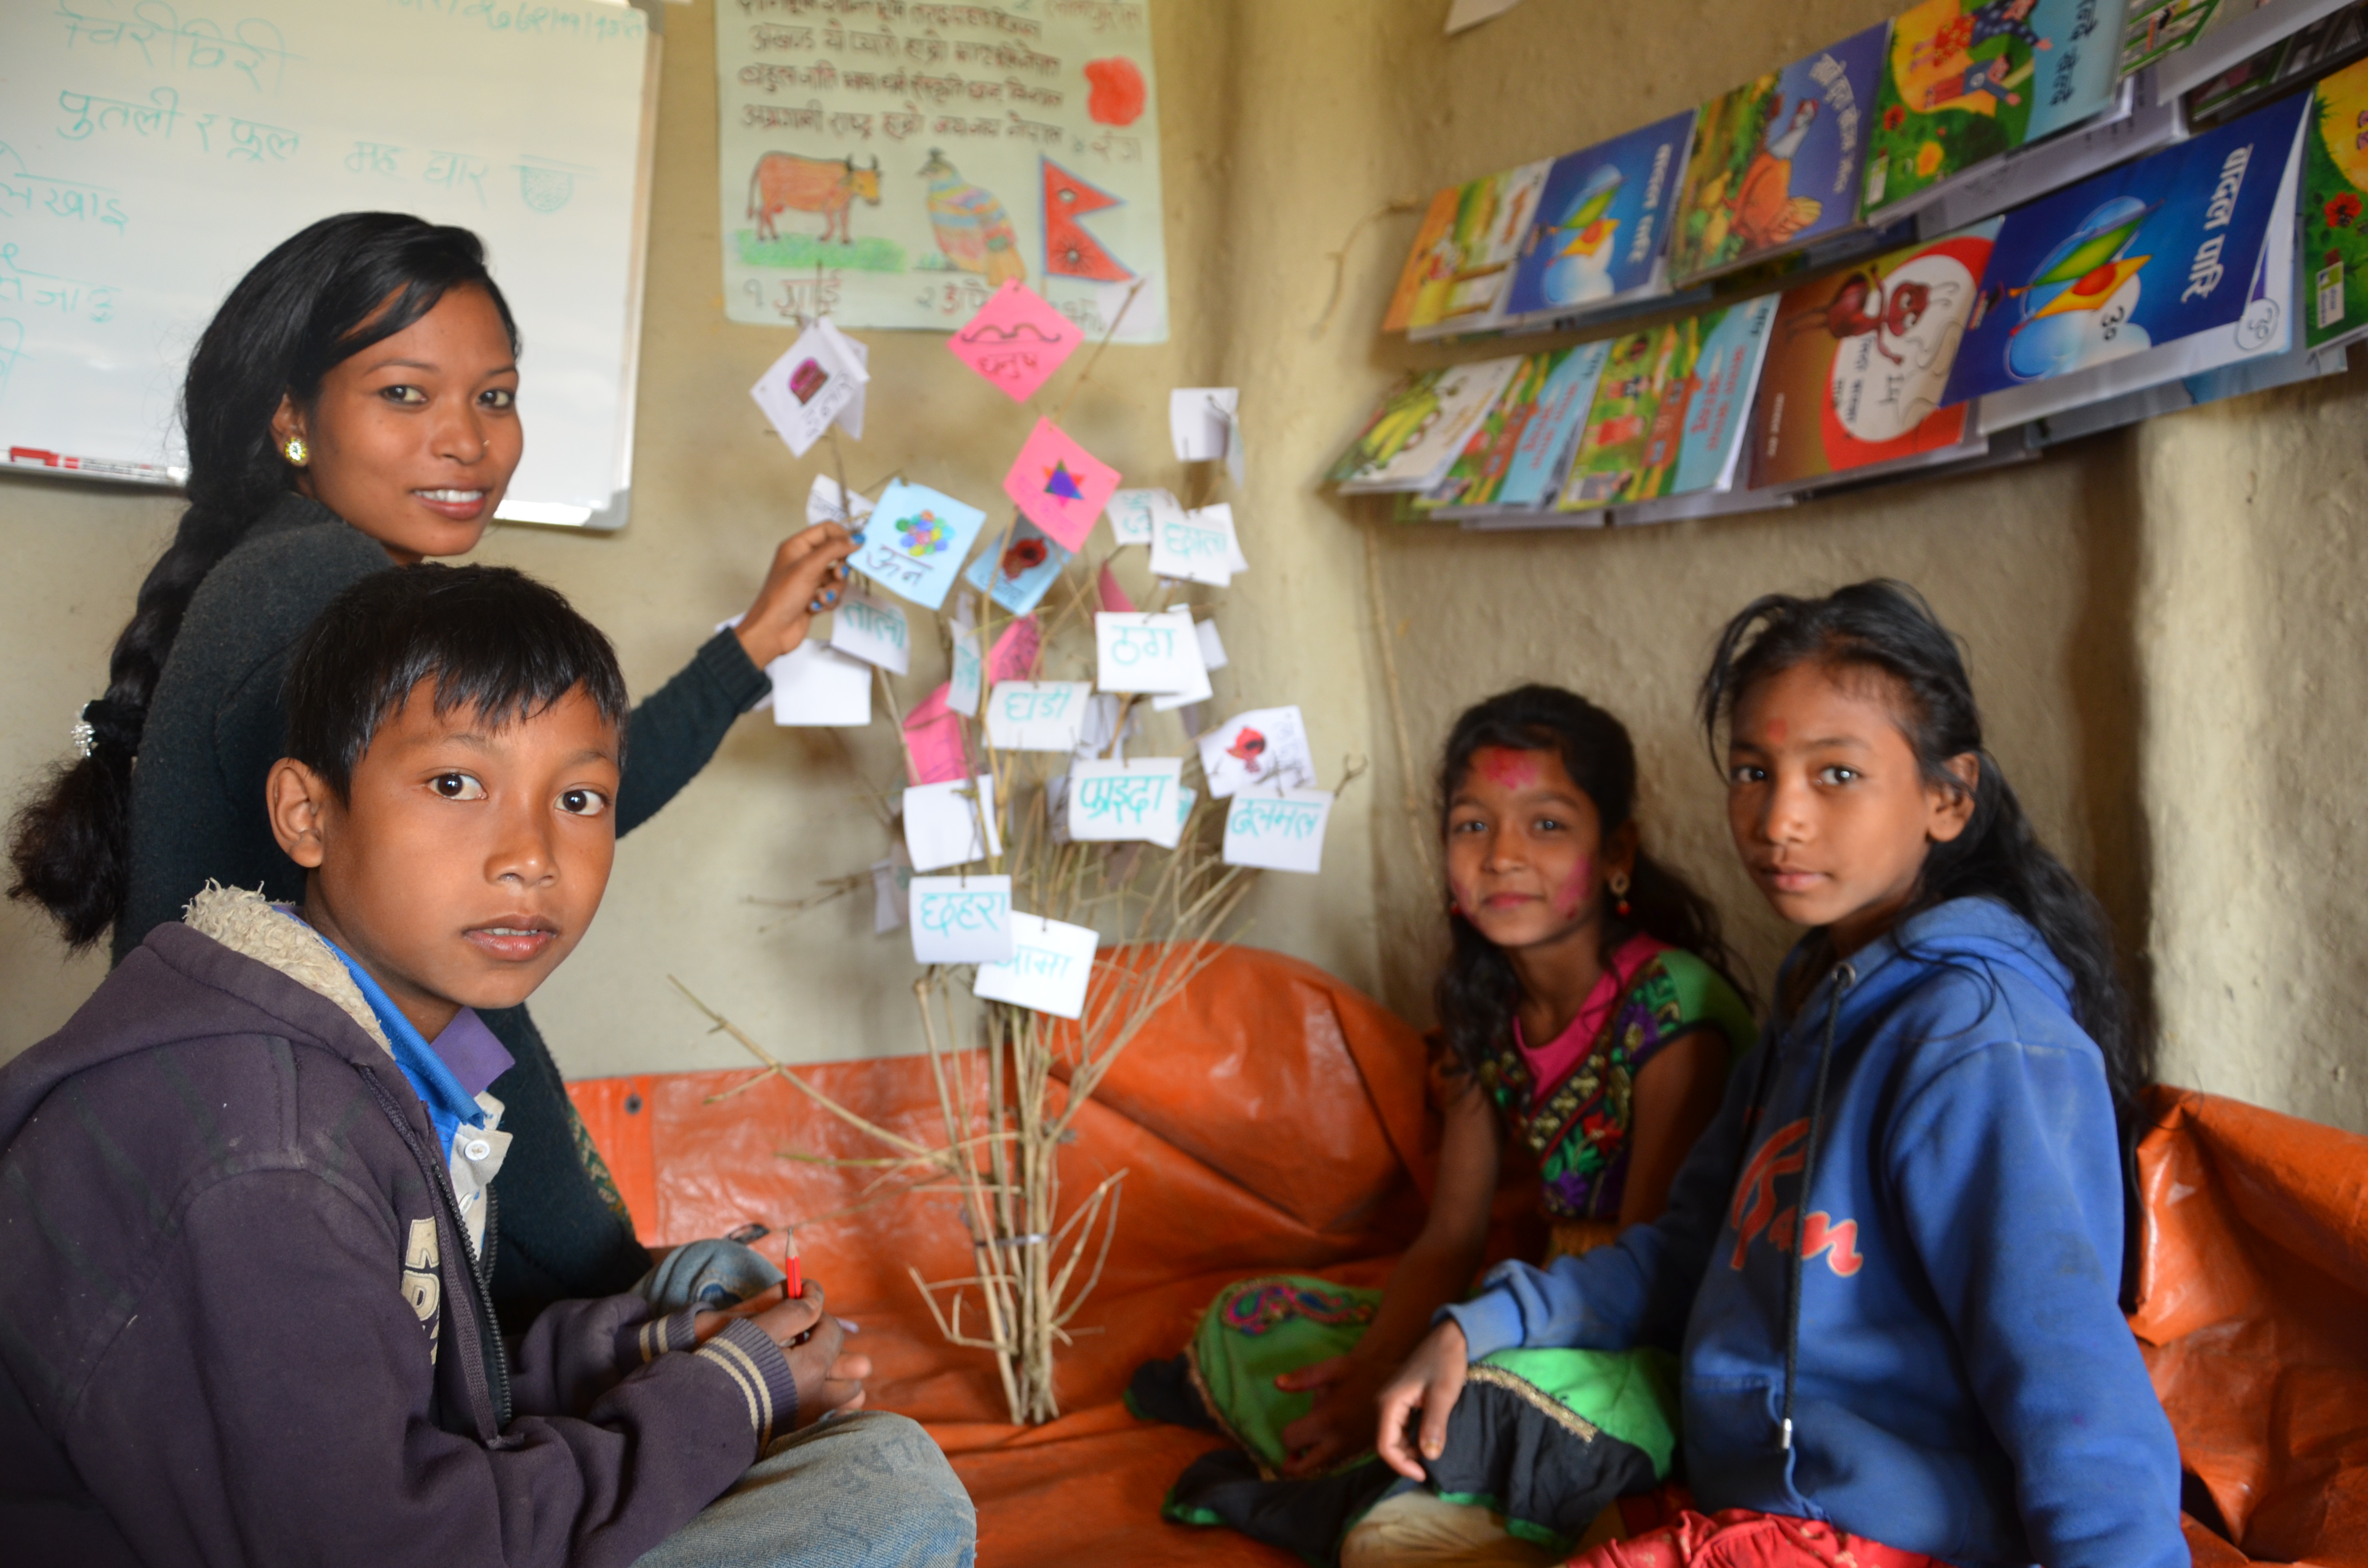 World tree at reading club in Nepal